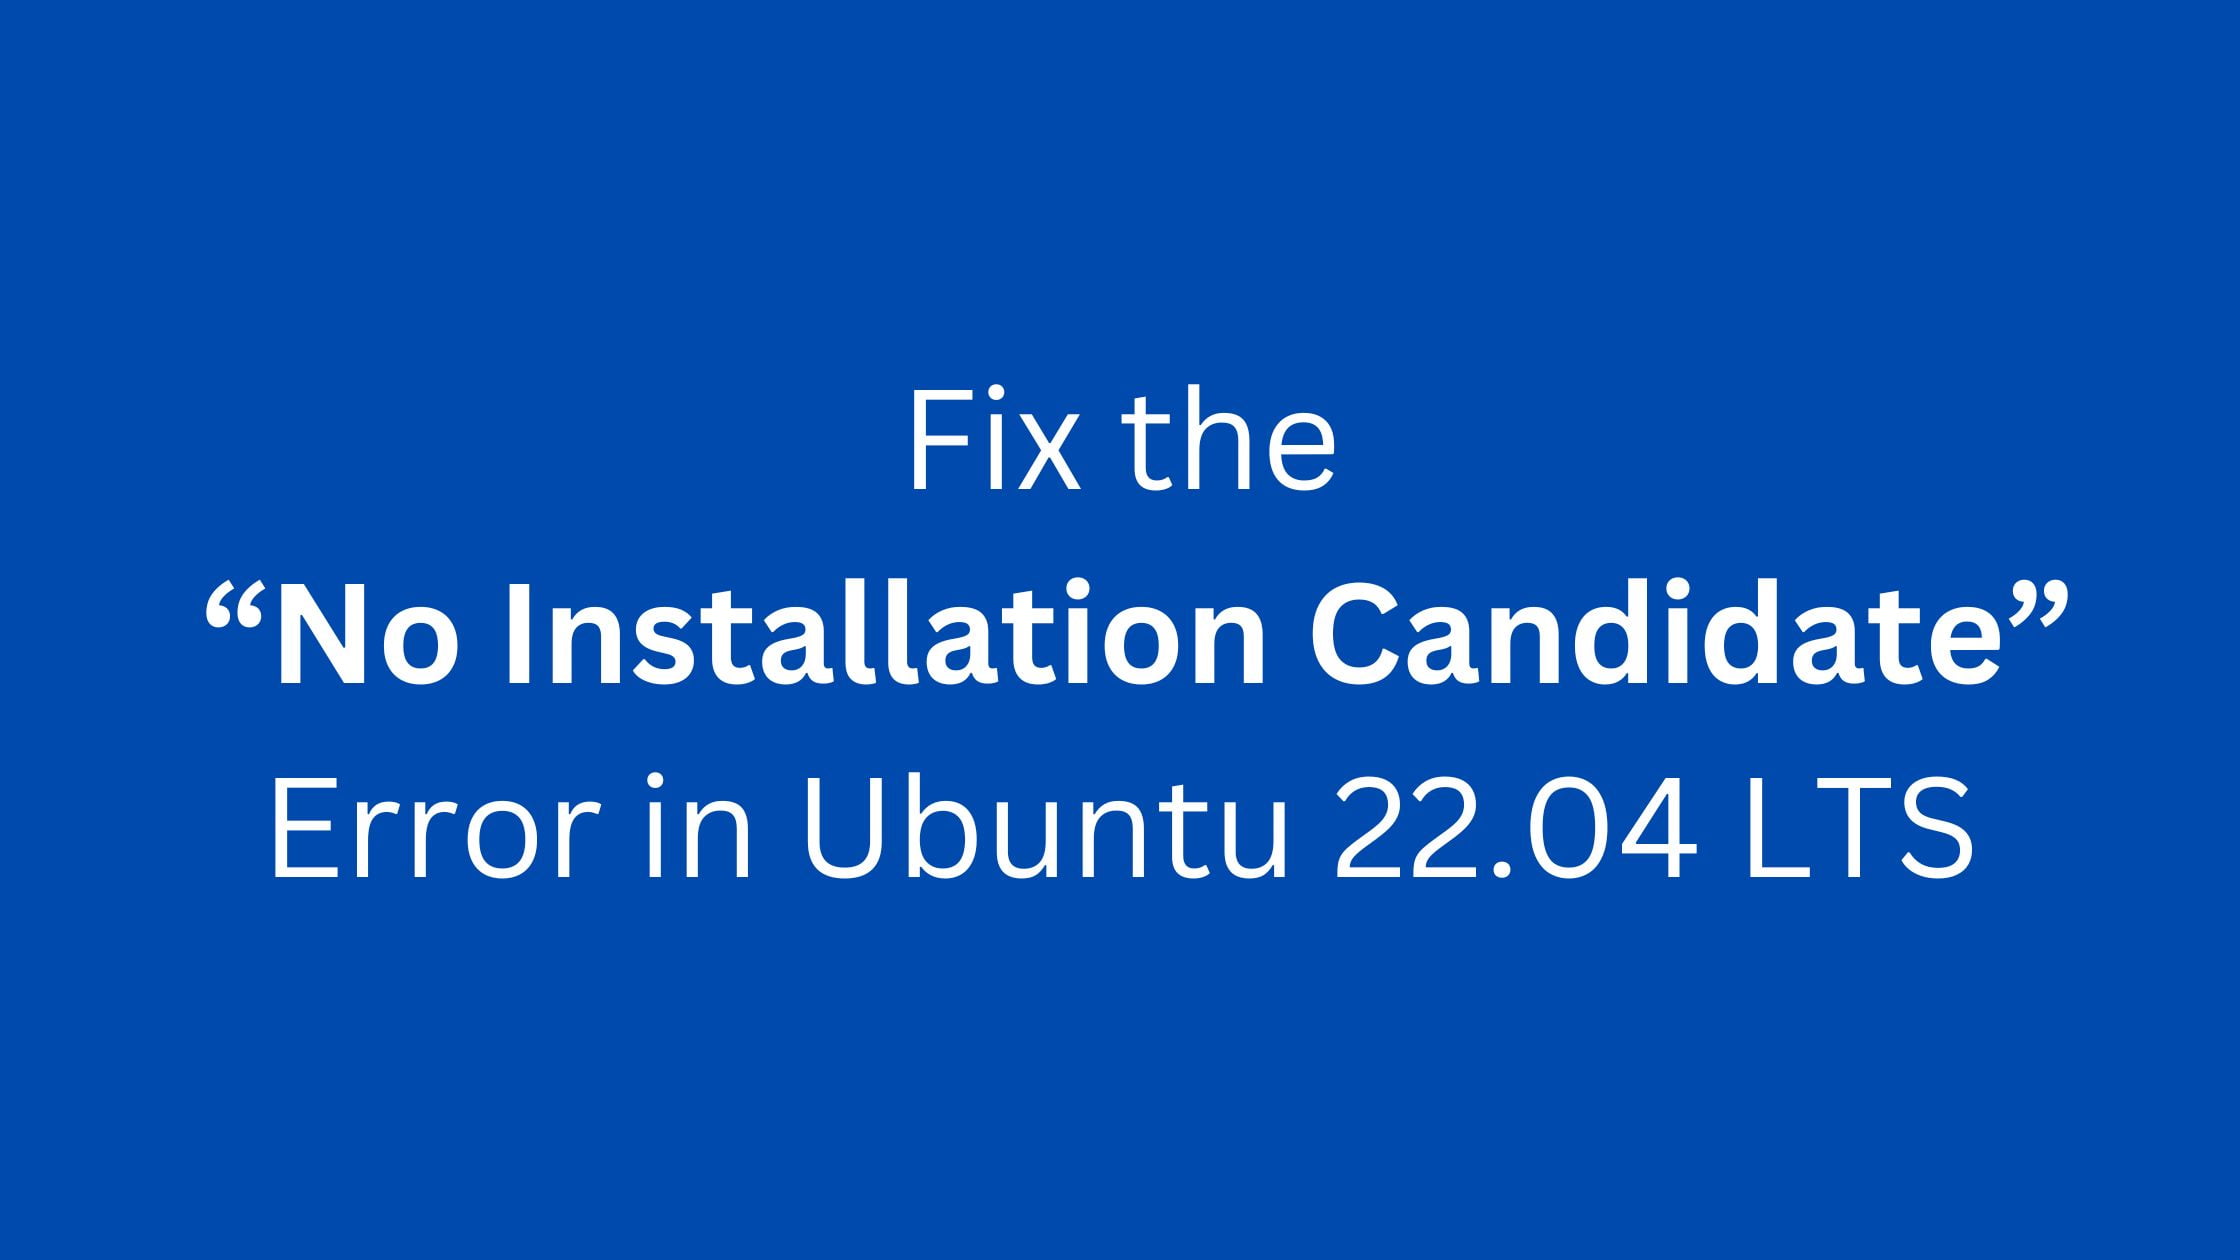 How To Fix the “No Installation Candidate” Error in Ubuntu 22.04 LTS